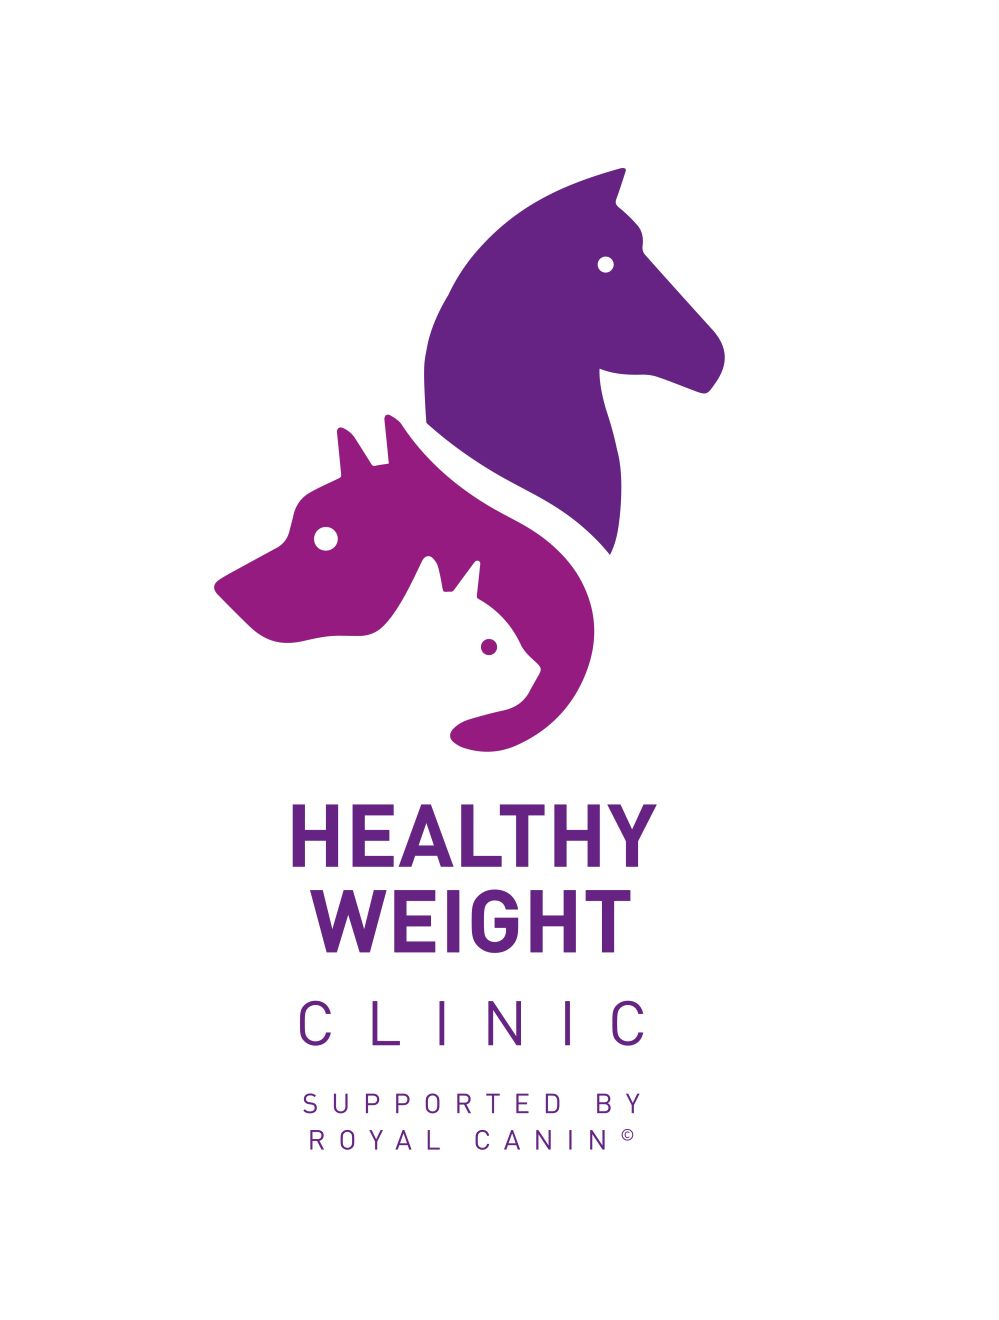 Healthy Weight Clinic logo